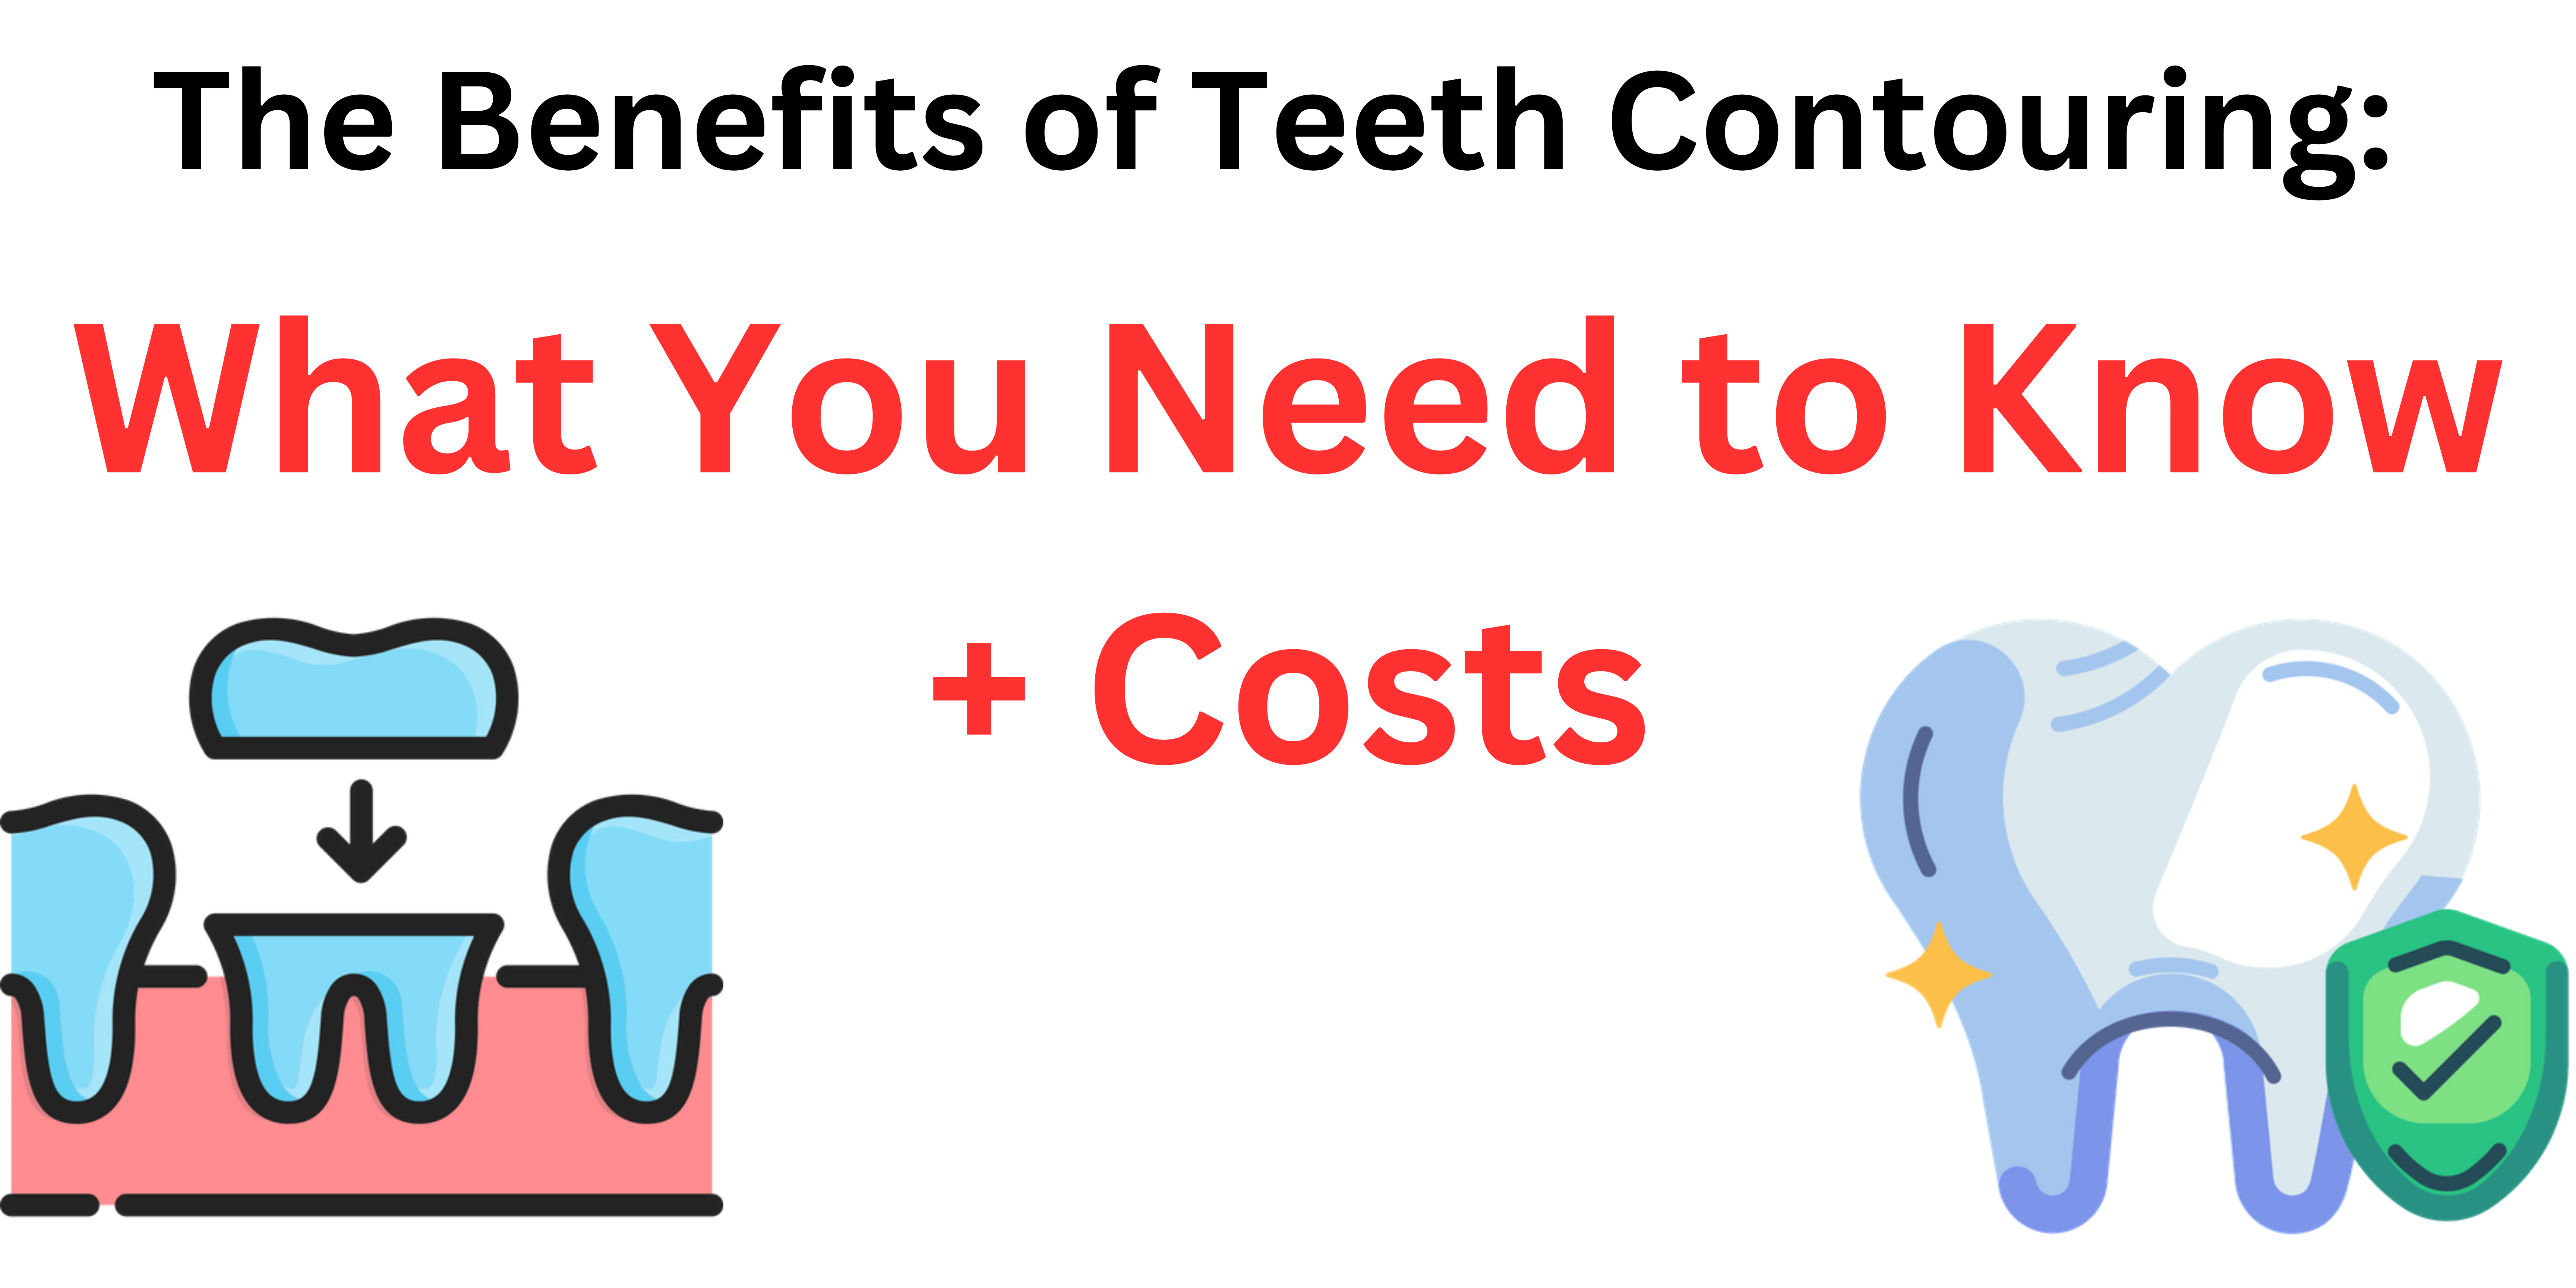 The Benefits of Teeth Contouring: What You Need to Know + Costs